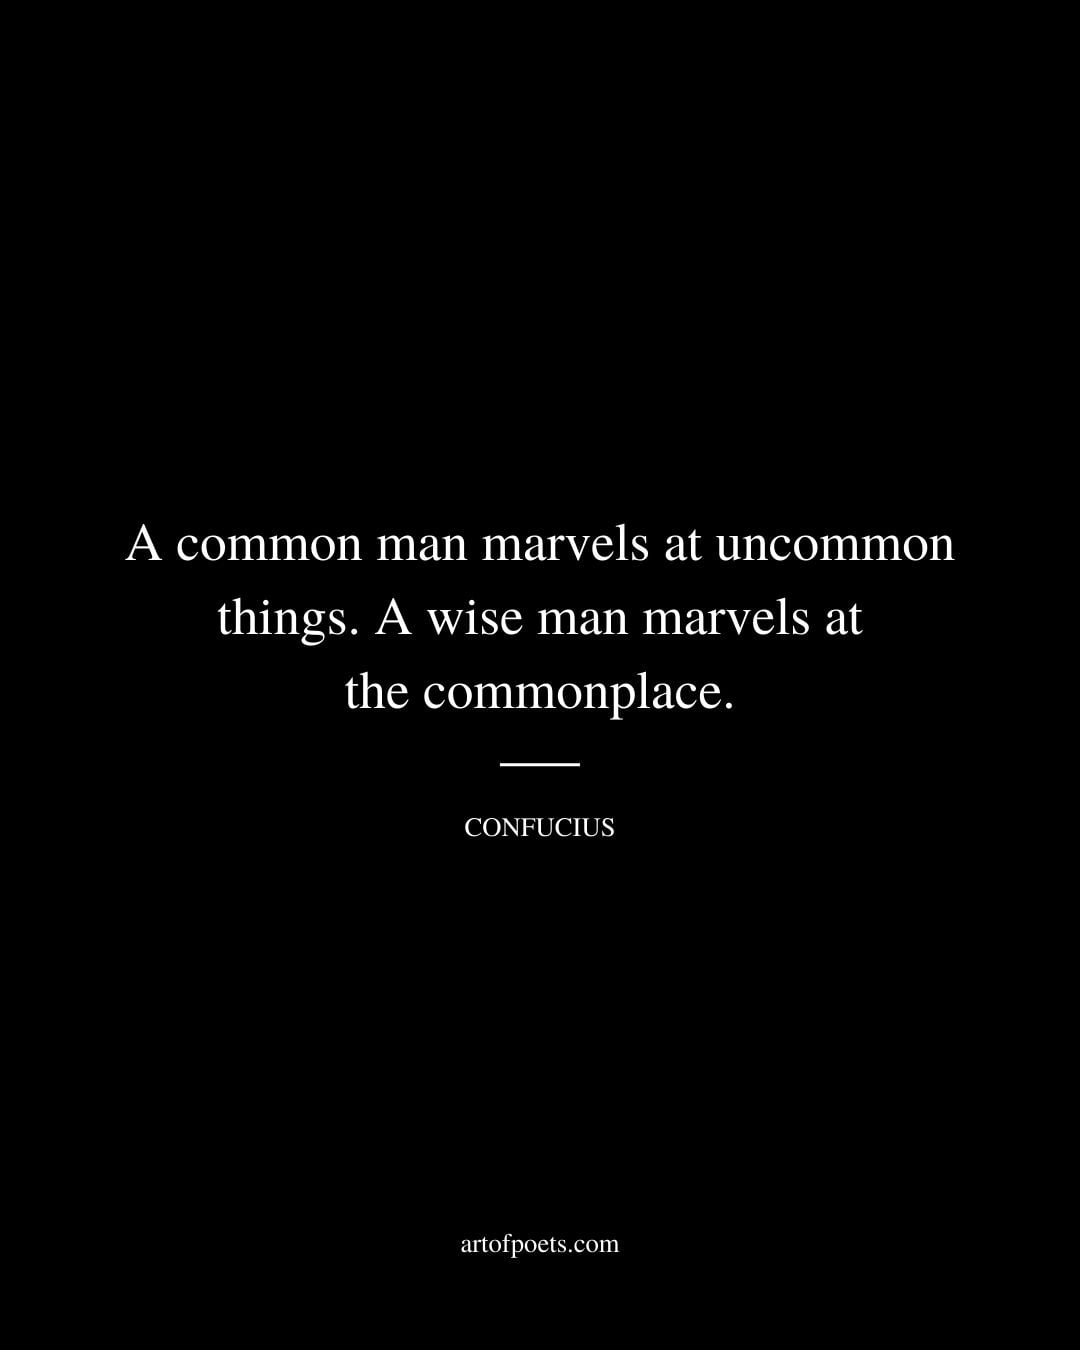 A common man marvels at uncommon things. A wise man marvels at the commonplace 1